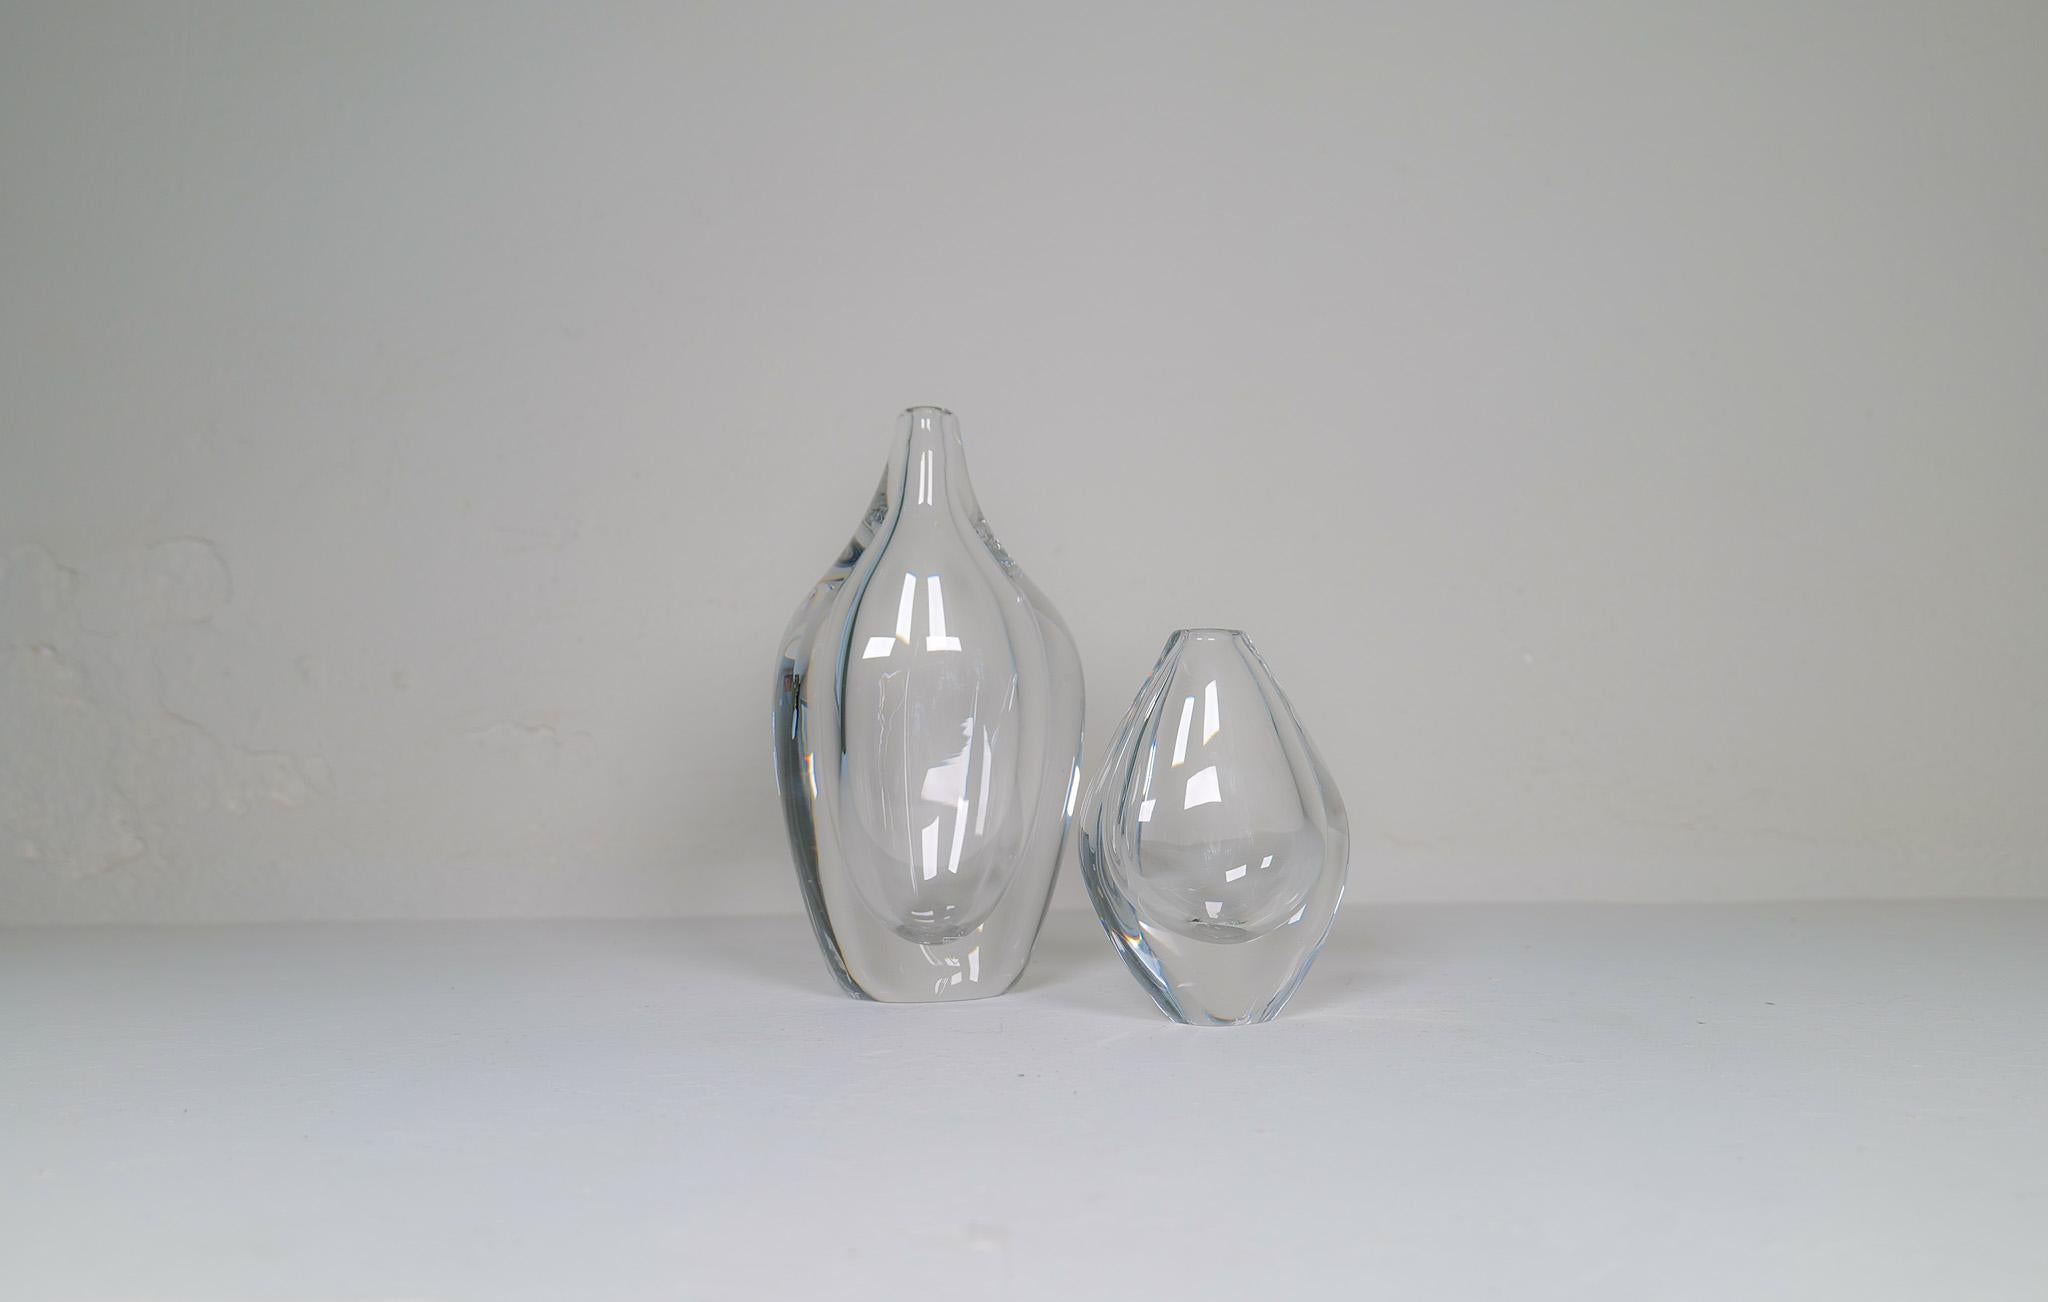 
Wonderful art glass vases designed by Erika Lagerbielke and Nils Landberg produced at Orrefors, Sweden. The large one is extremely heavy and together they give a great modern look. 

Good condition signed and labeled.

Measures: H 29cm, W 16 cm D 9